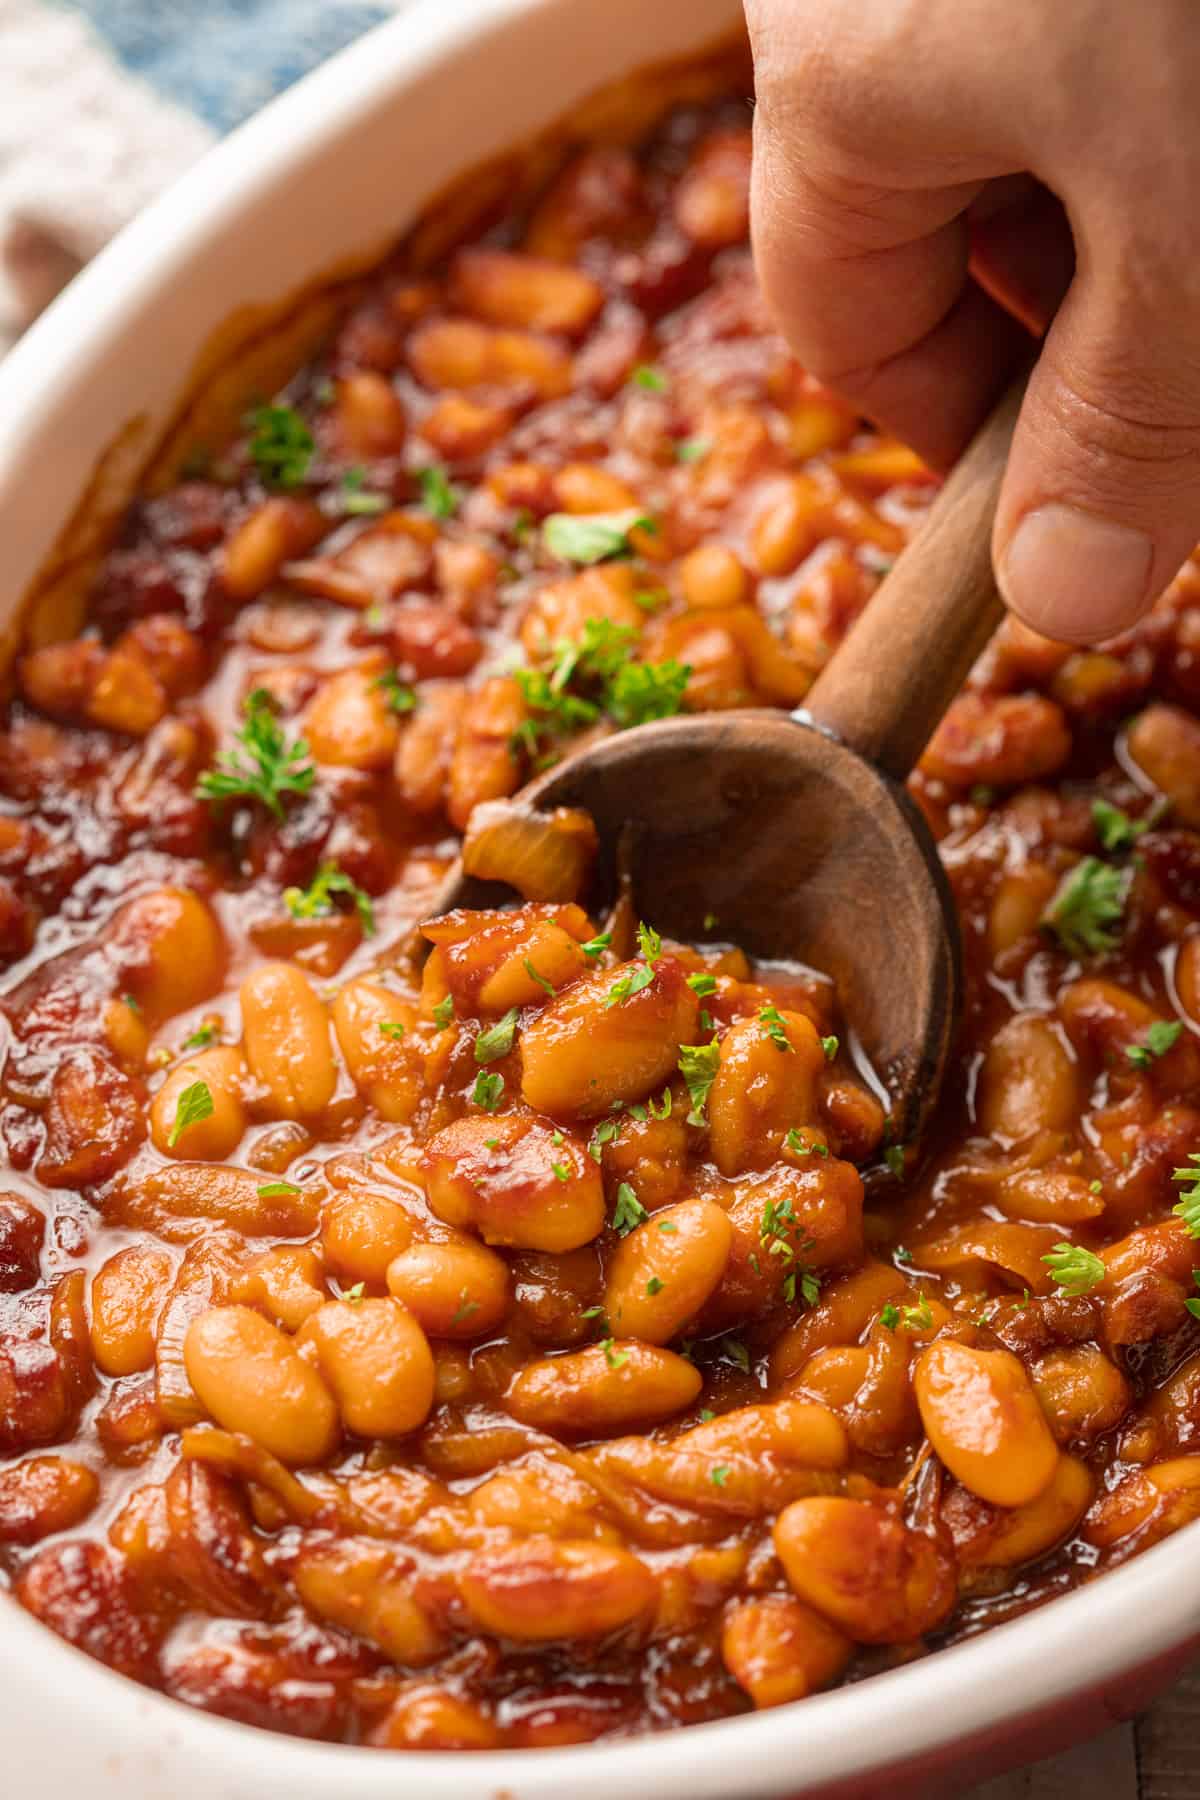 Hand with spoon scooping Vegan Baked Beans from a baking dish.